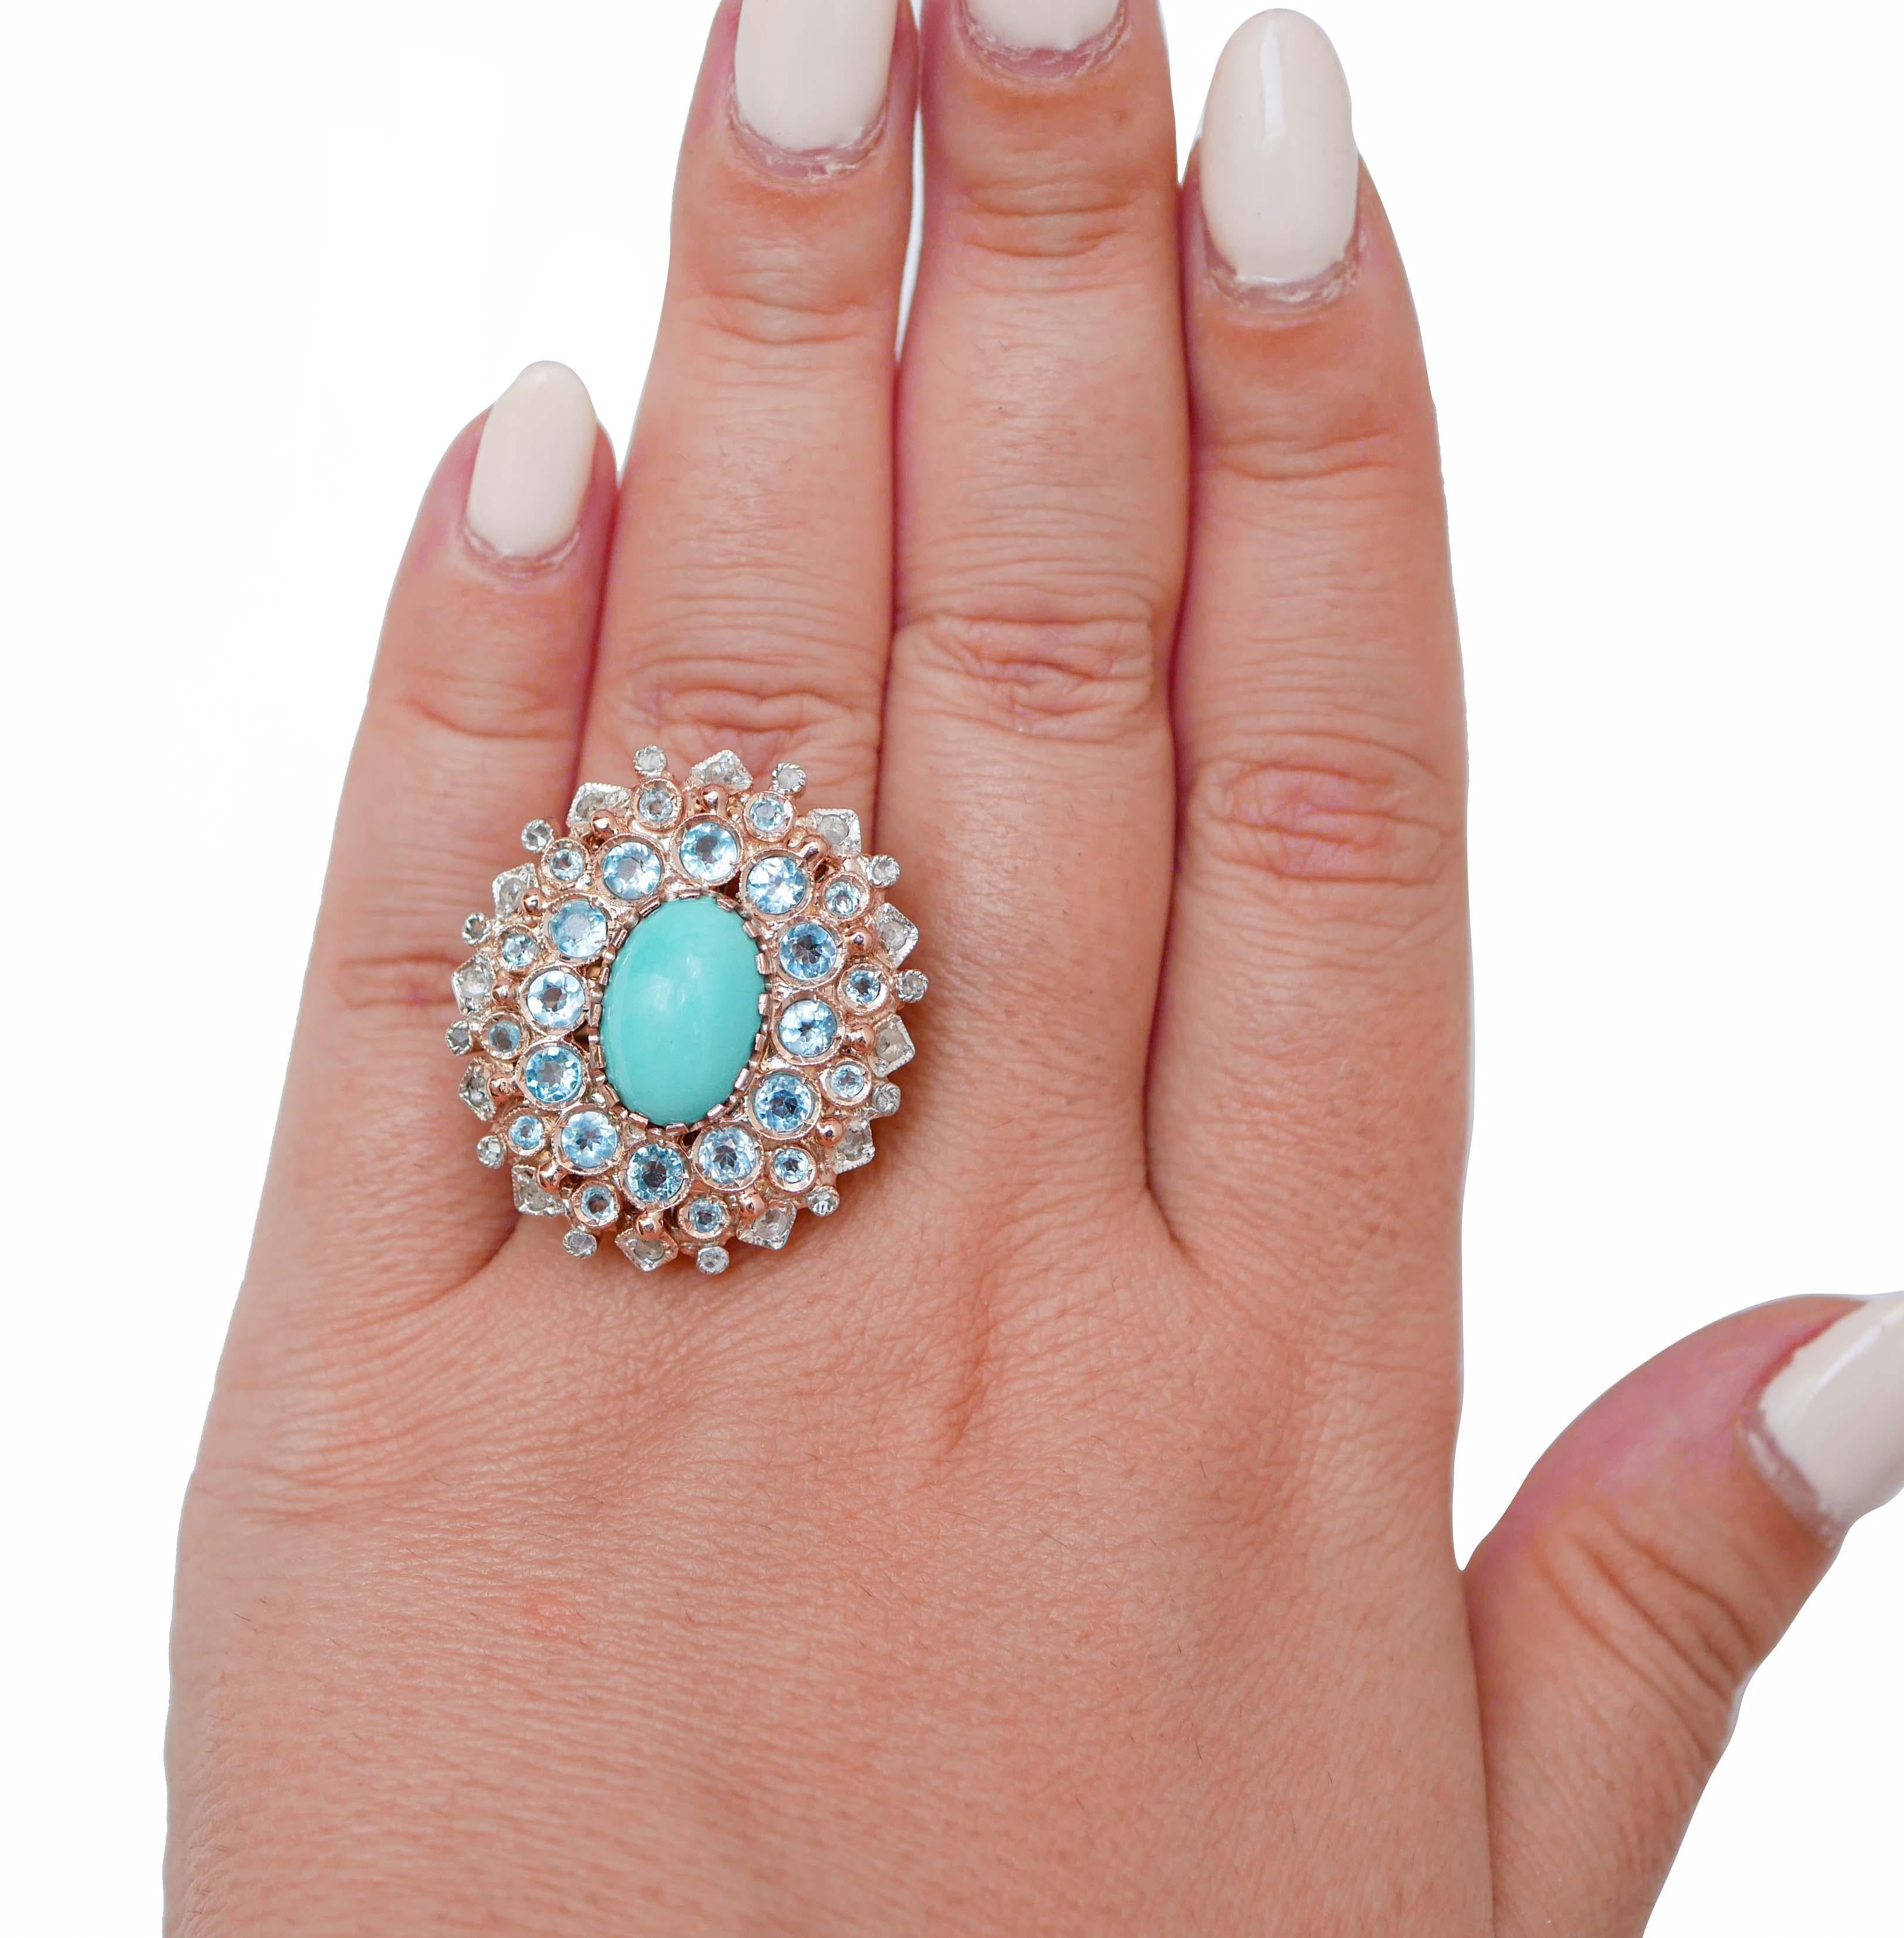 Mixed Cut Turquoise, Topazs, Diamonds, Rose Gold and Silver Ring. For Sale